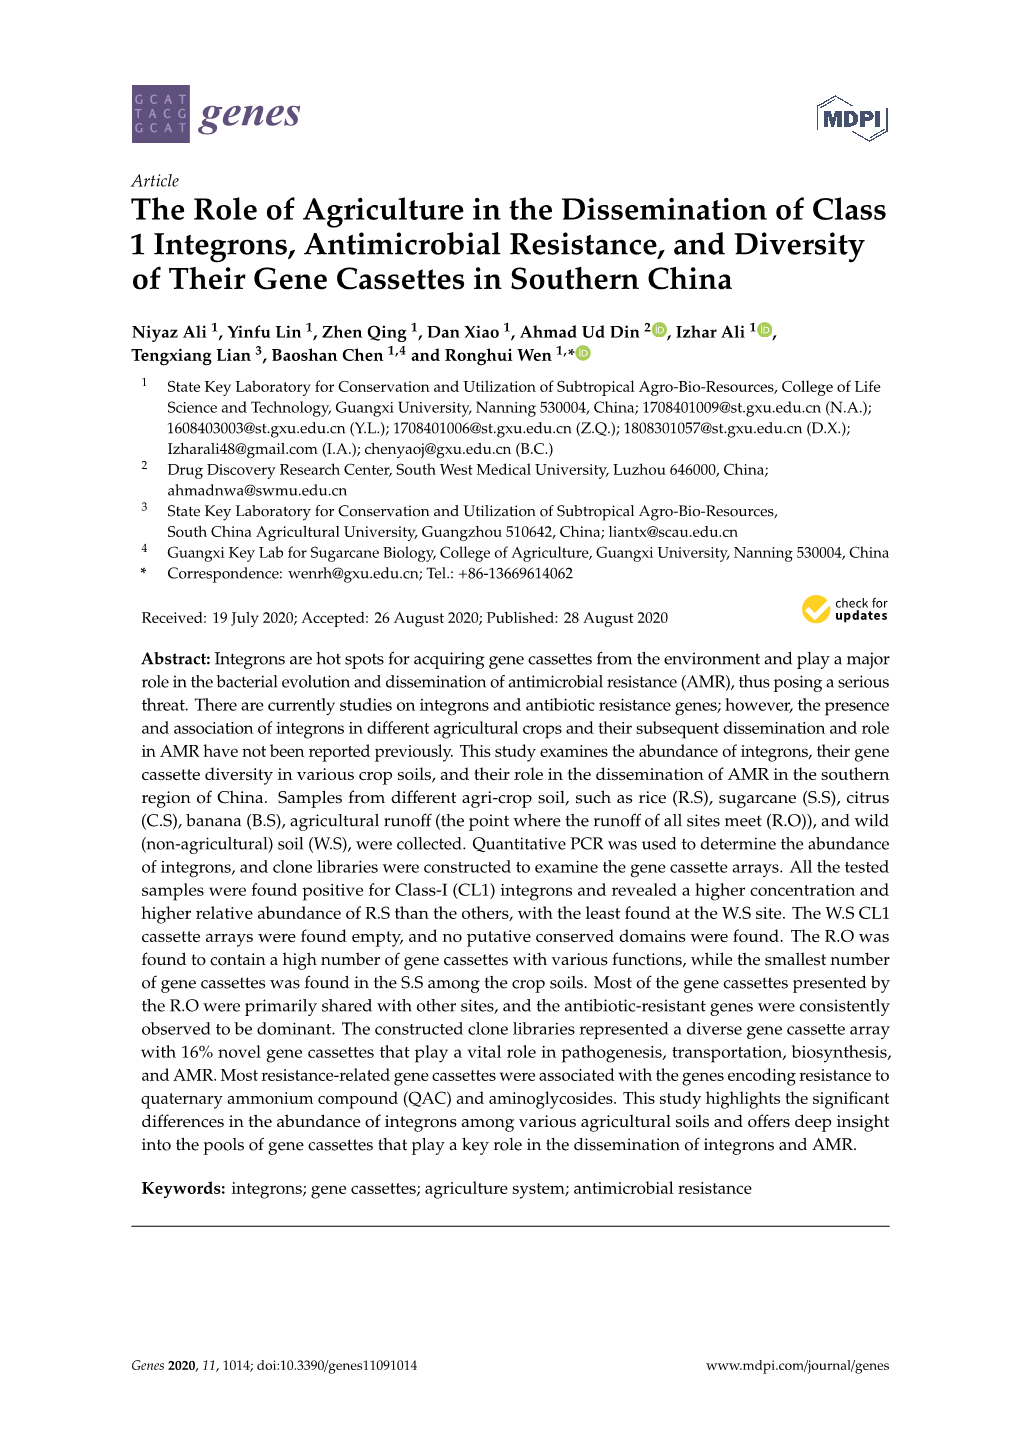 The Role of Agriculture in the Dissemination of Class 1 Integrons, Antimicrobial Resistance, and Diversity of Their Gene Cassettes in Southern China